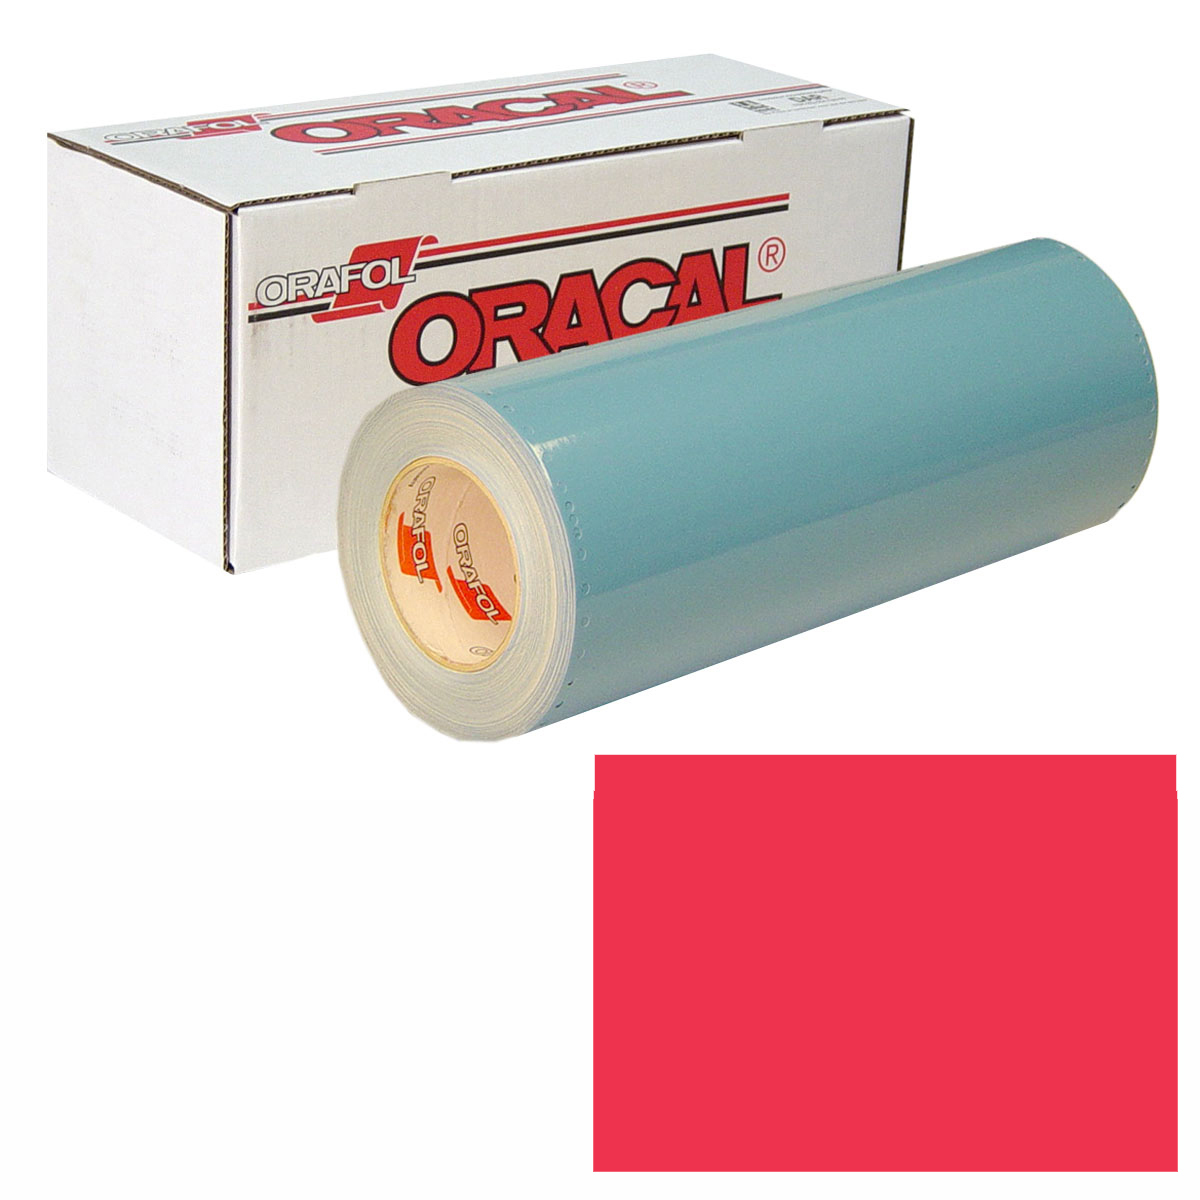 ORACAL 751 30in X 50yd 324 Blood Red